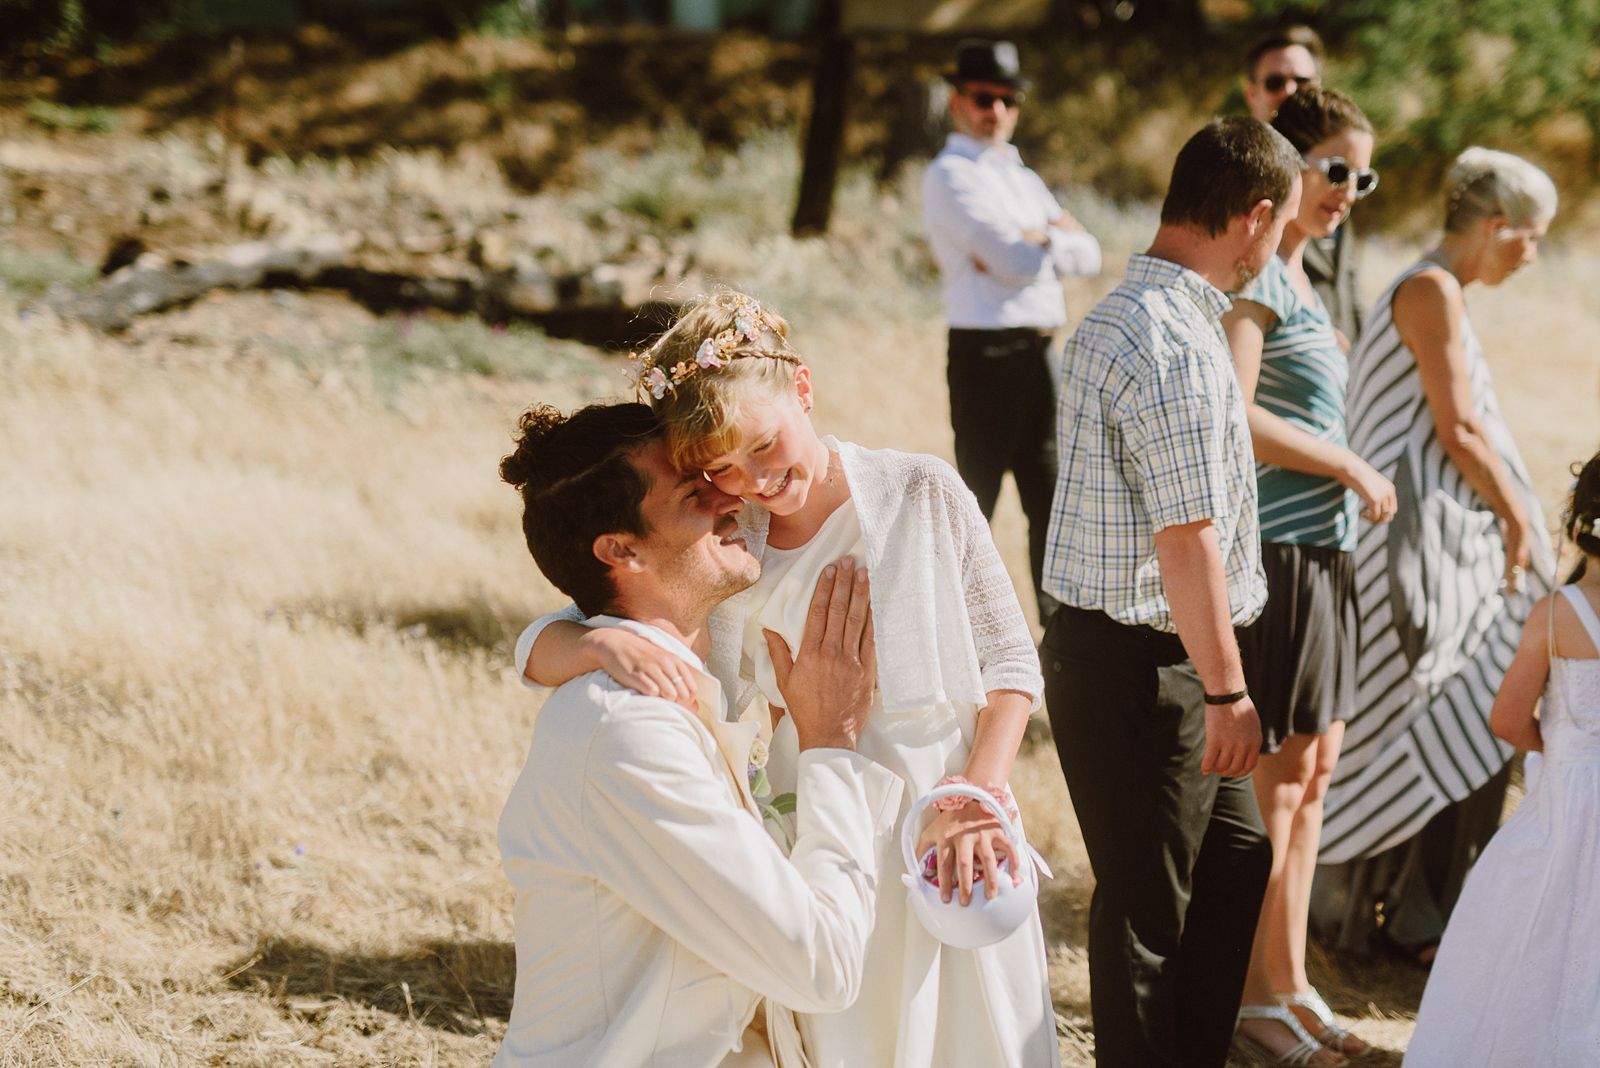 Groom hugging his daughter before walking down the aisle - Columbia Gorge River Wedding